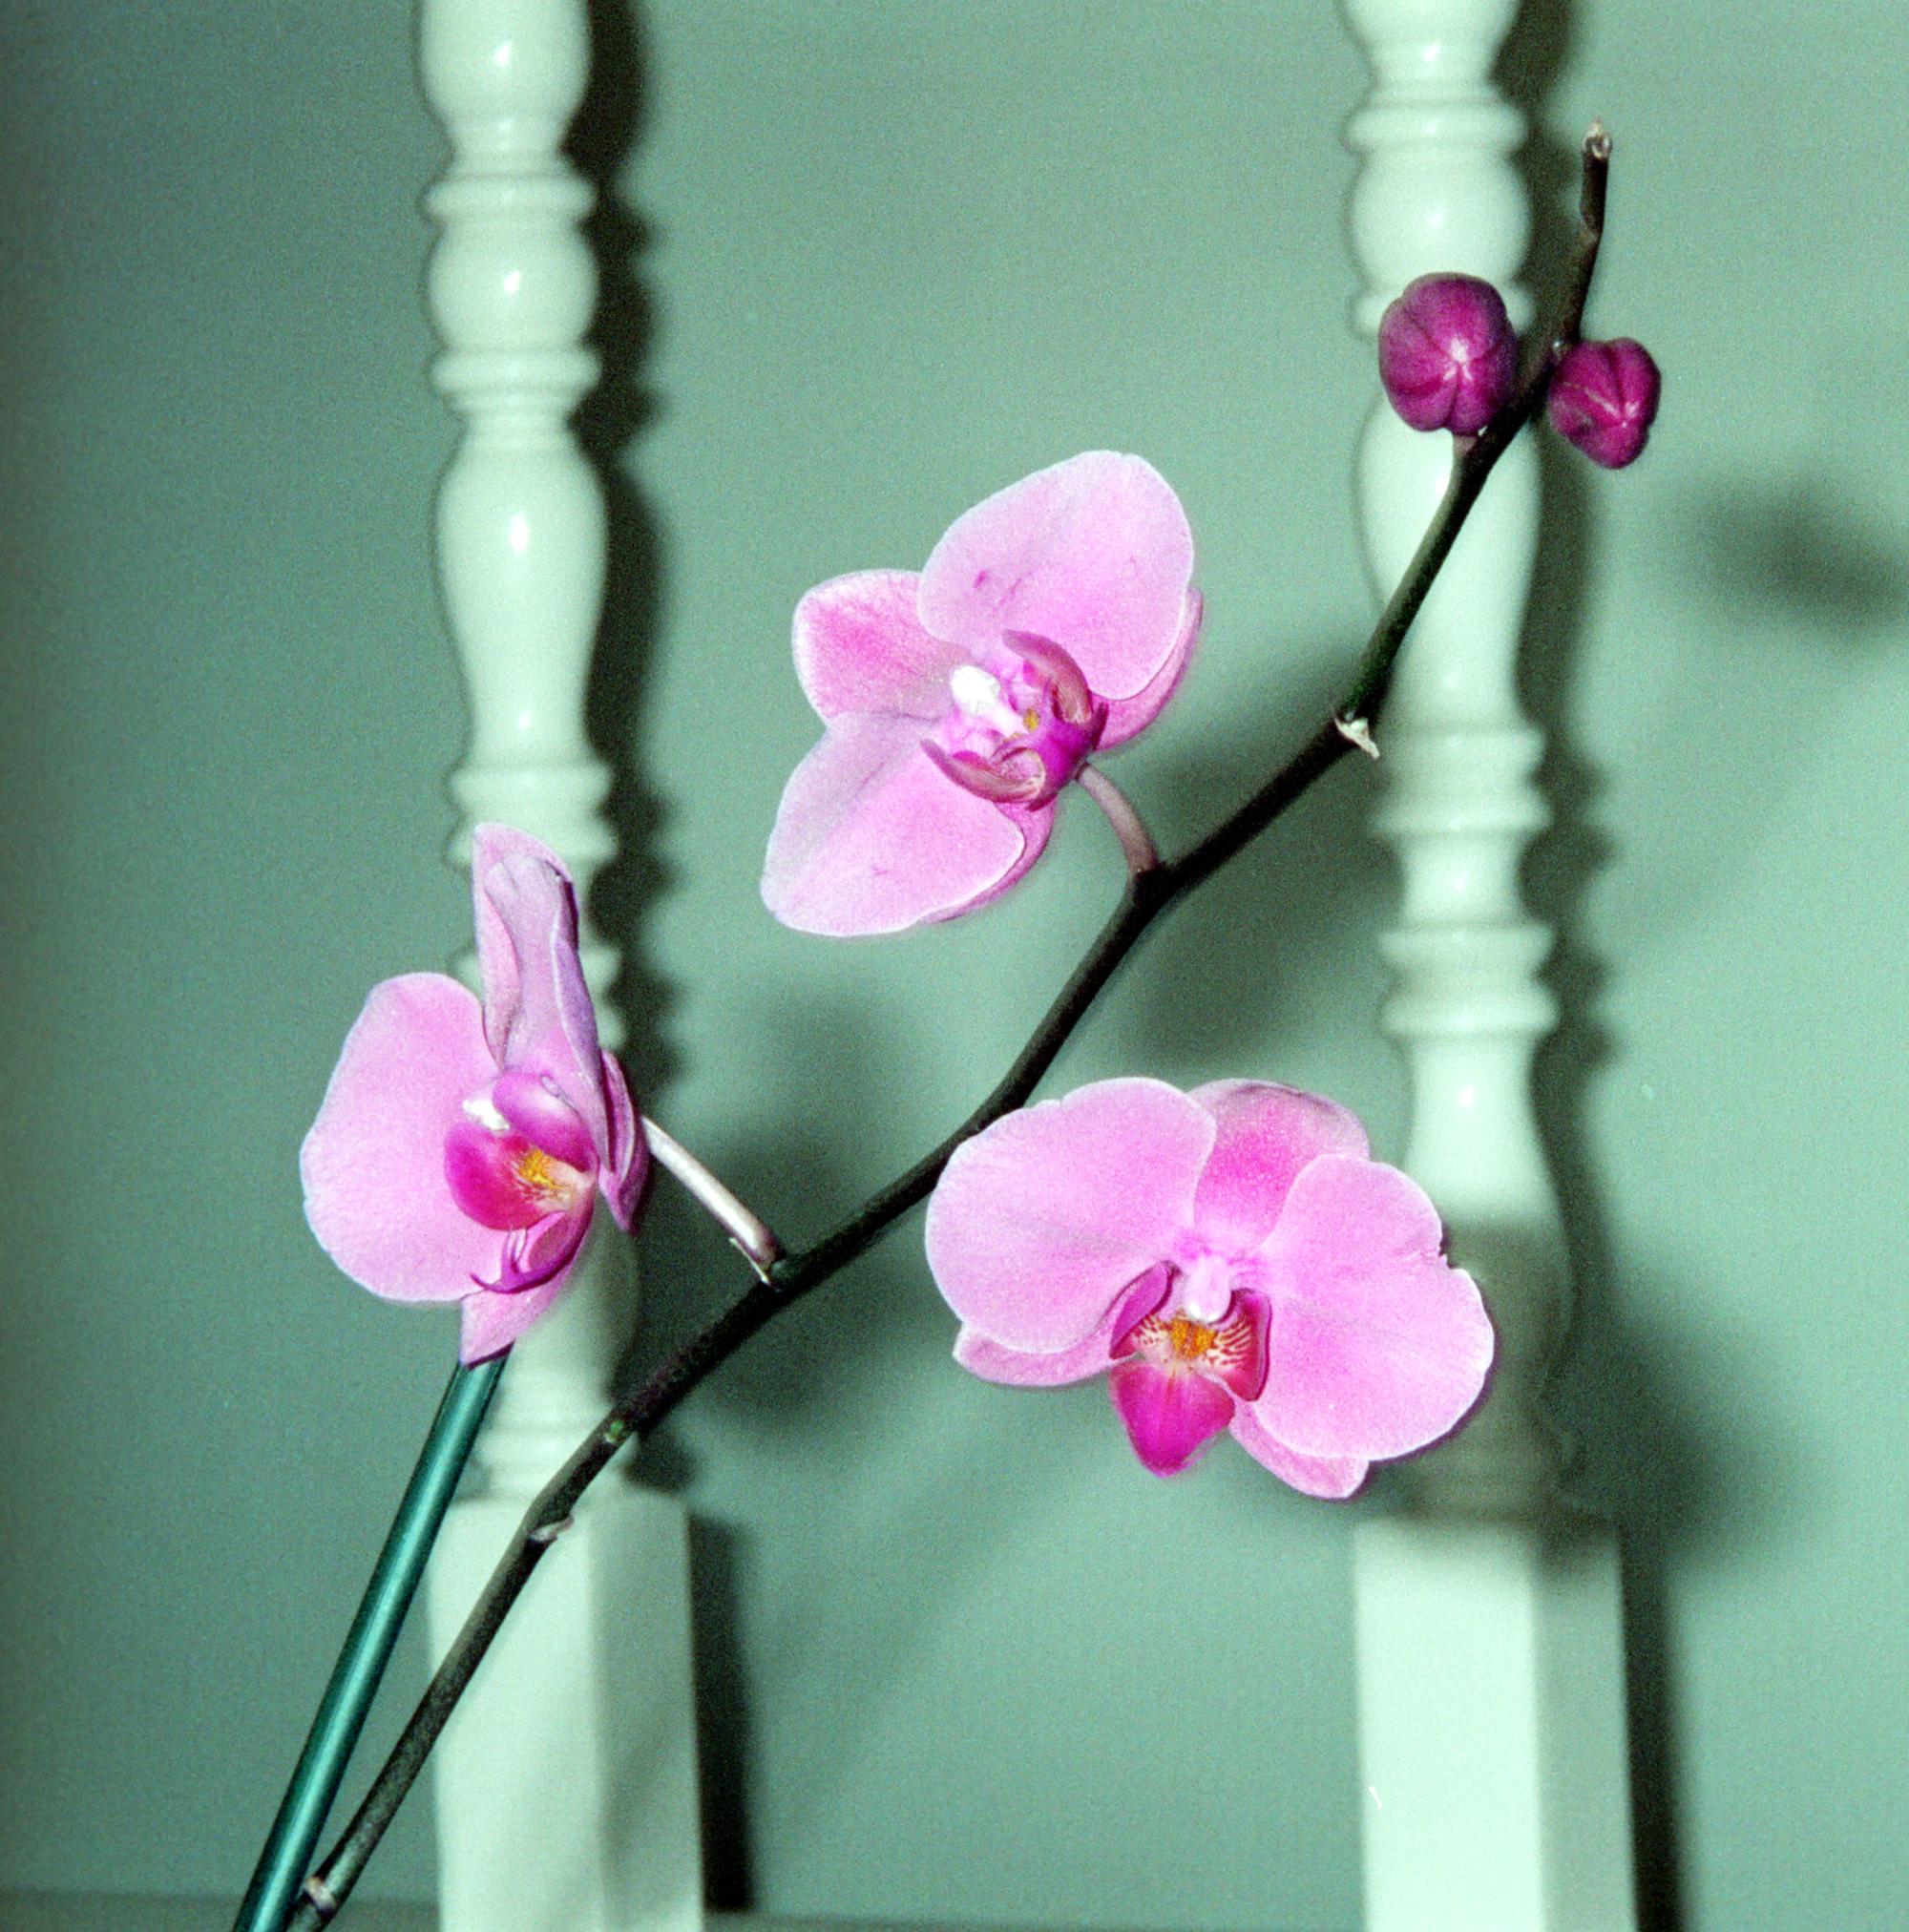 Flowers - Orchid #4